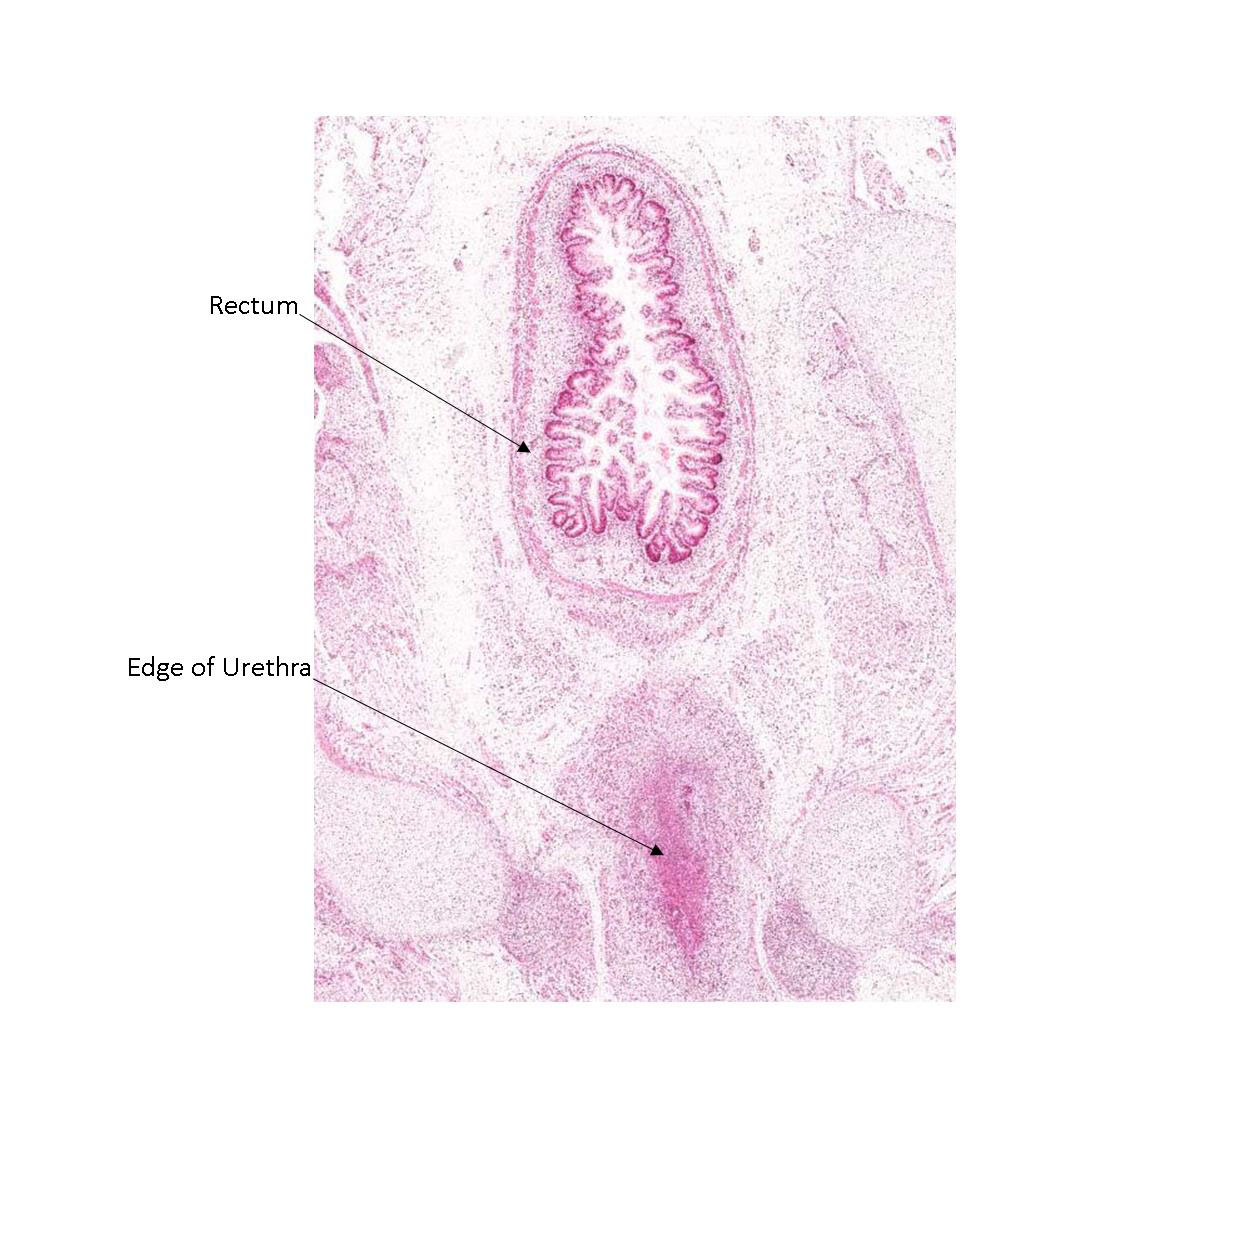 A histology section of a human fetus